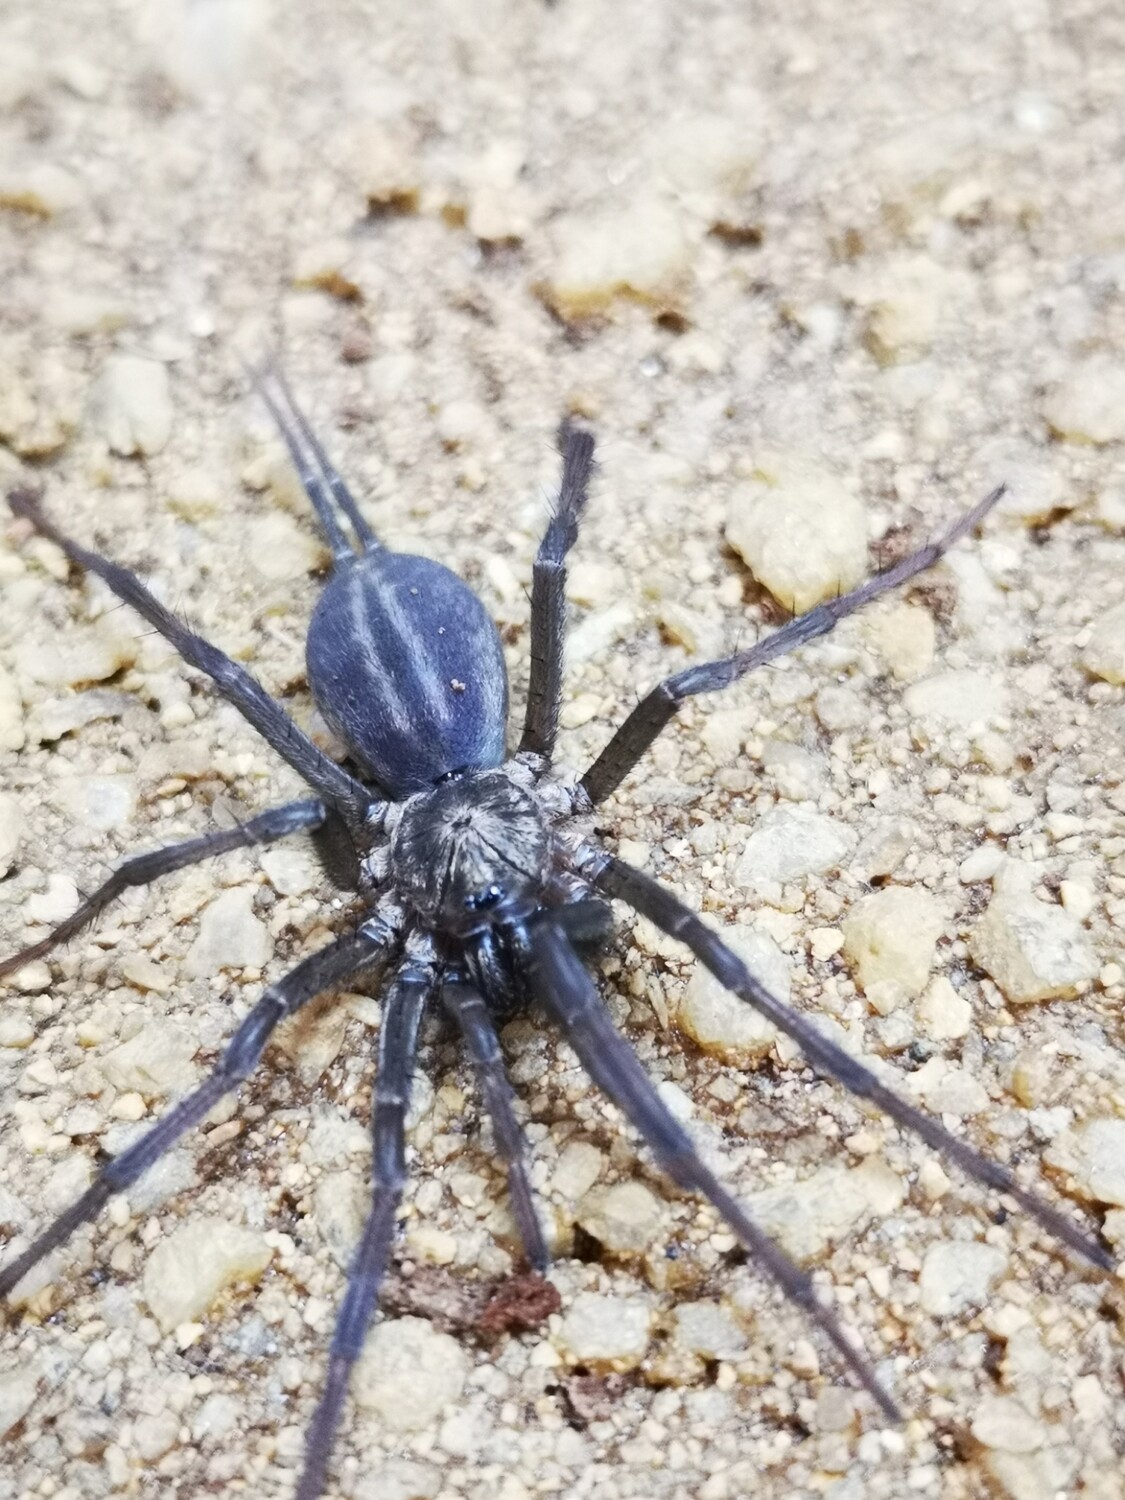 Linothele sericata (Ex megatheloides (3-4cm) Colombian Funnel Web Spider